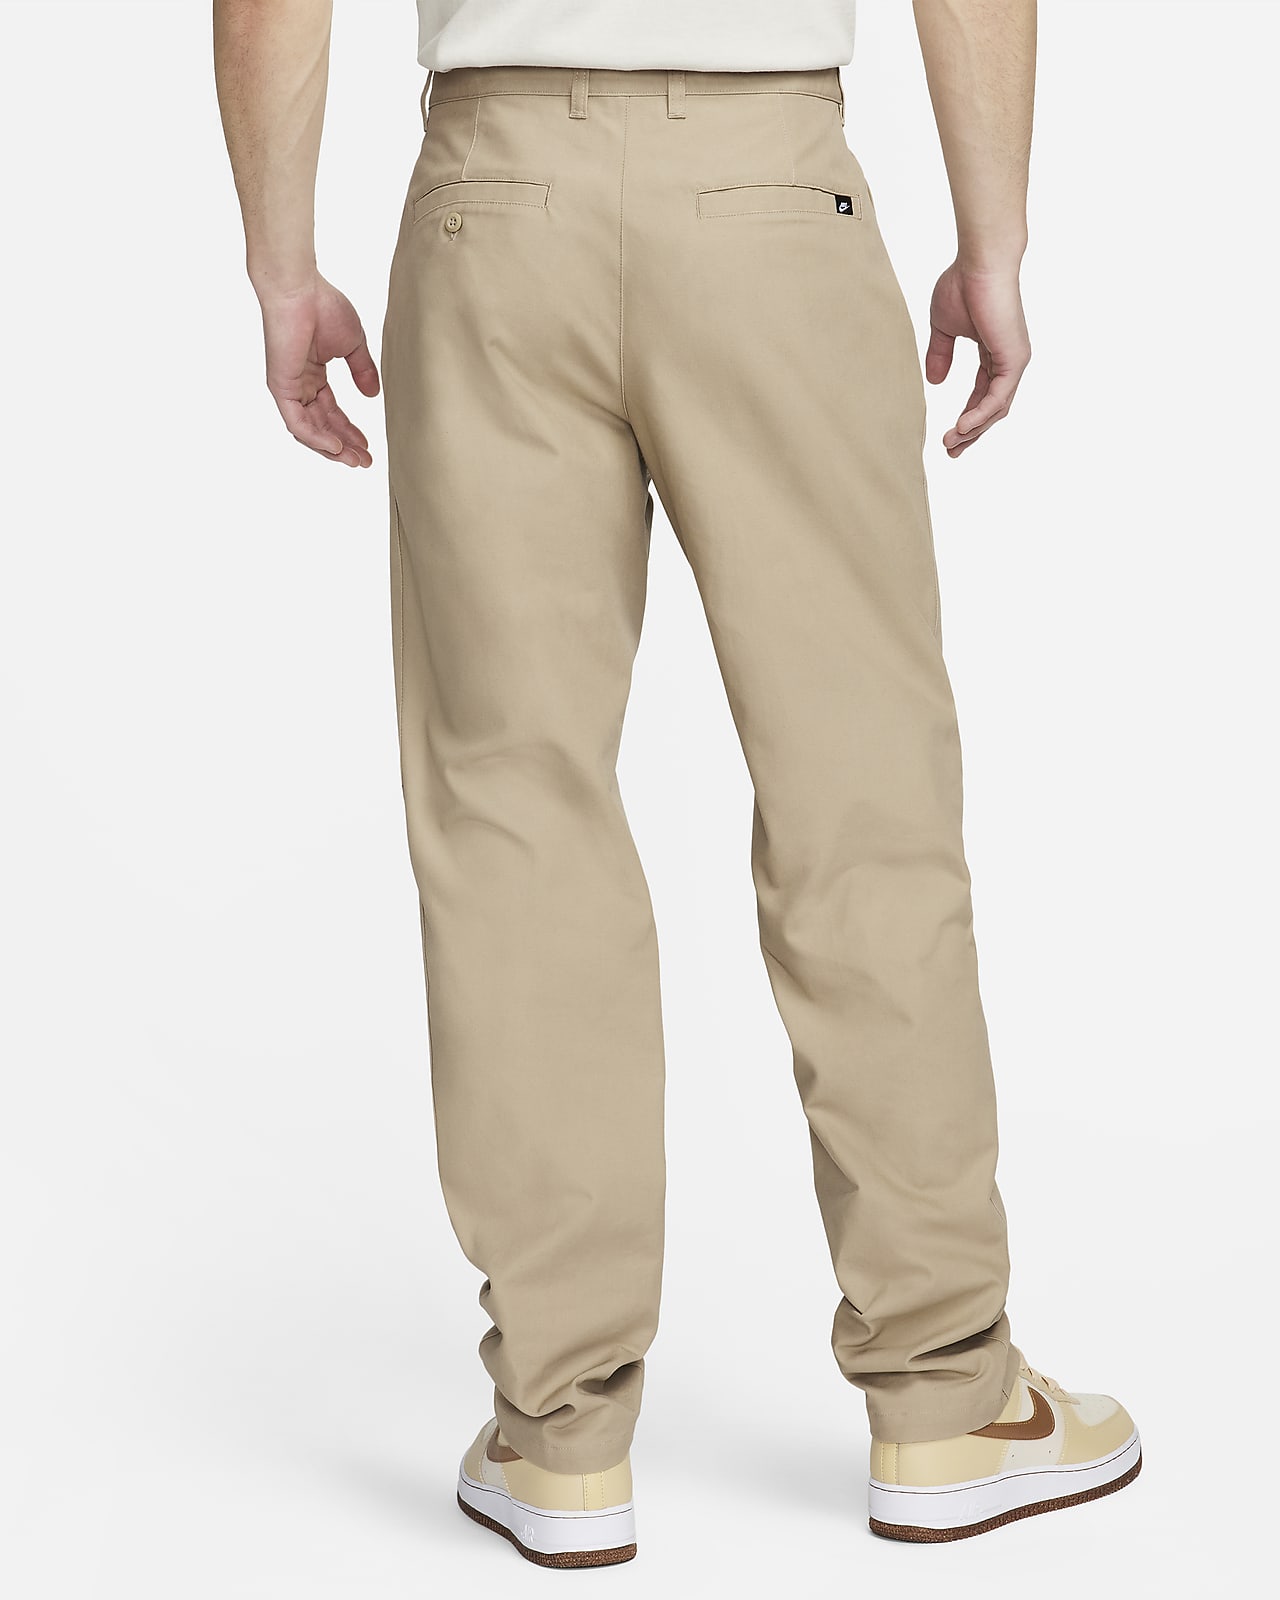 Low waist chinos trousers - Beige - Women - Gina Tricot